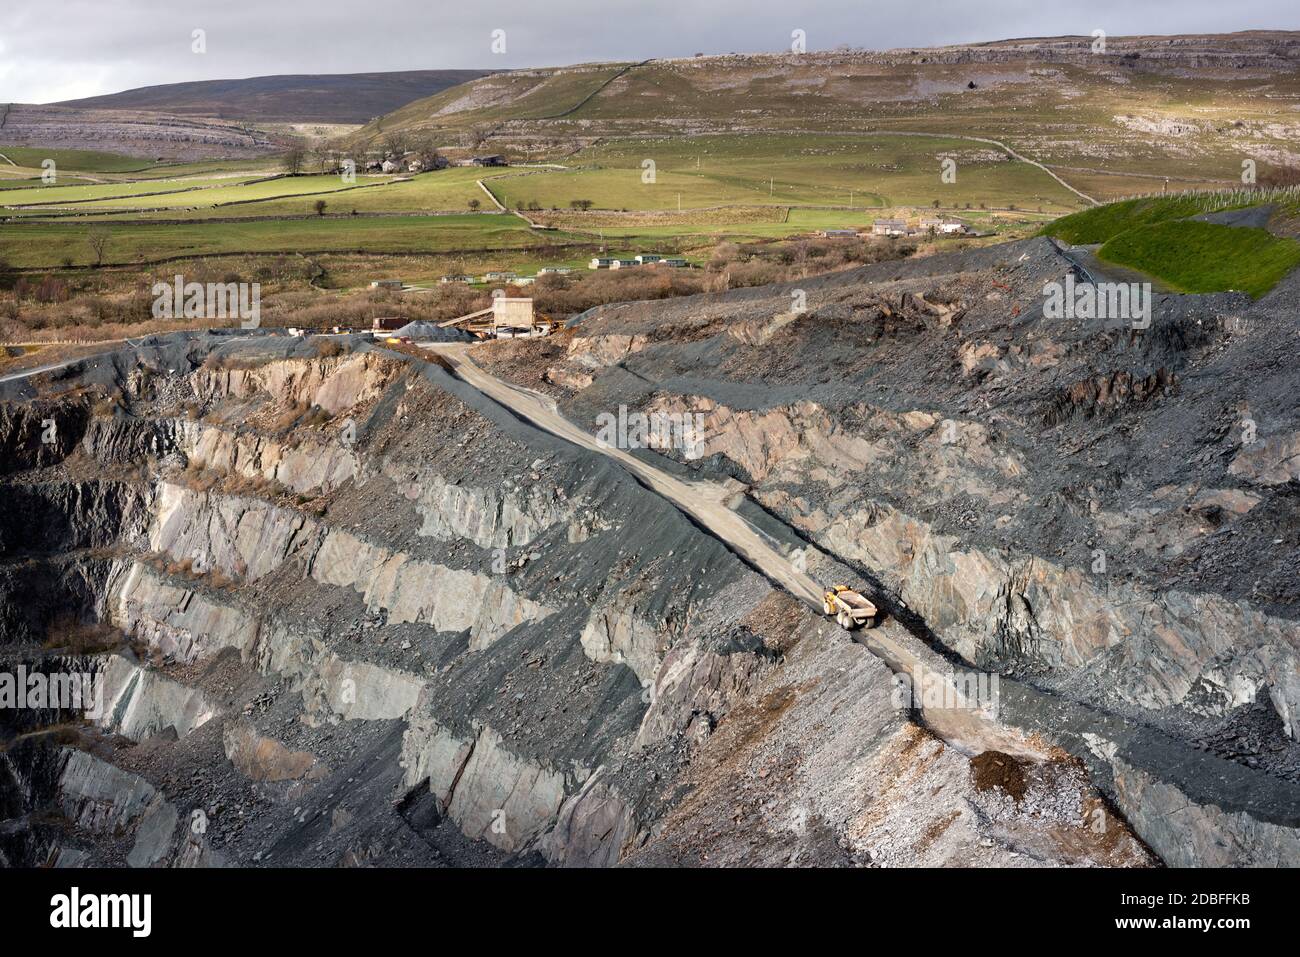 Ingleton Quarry, Yorkshire Dales National Park, seen from the public viewing platform. A hardstone quarry (Greywacke stone) run by Hanson Aggregates. Stock Photo